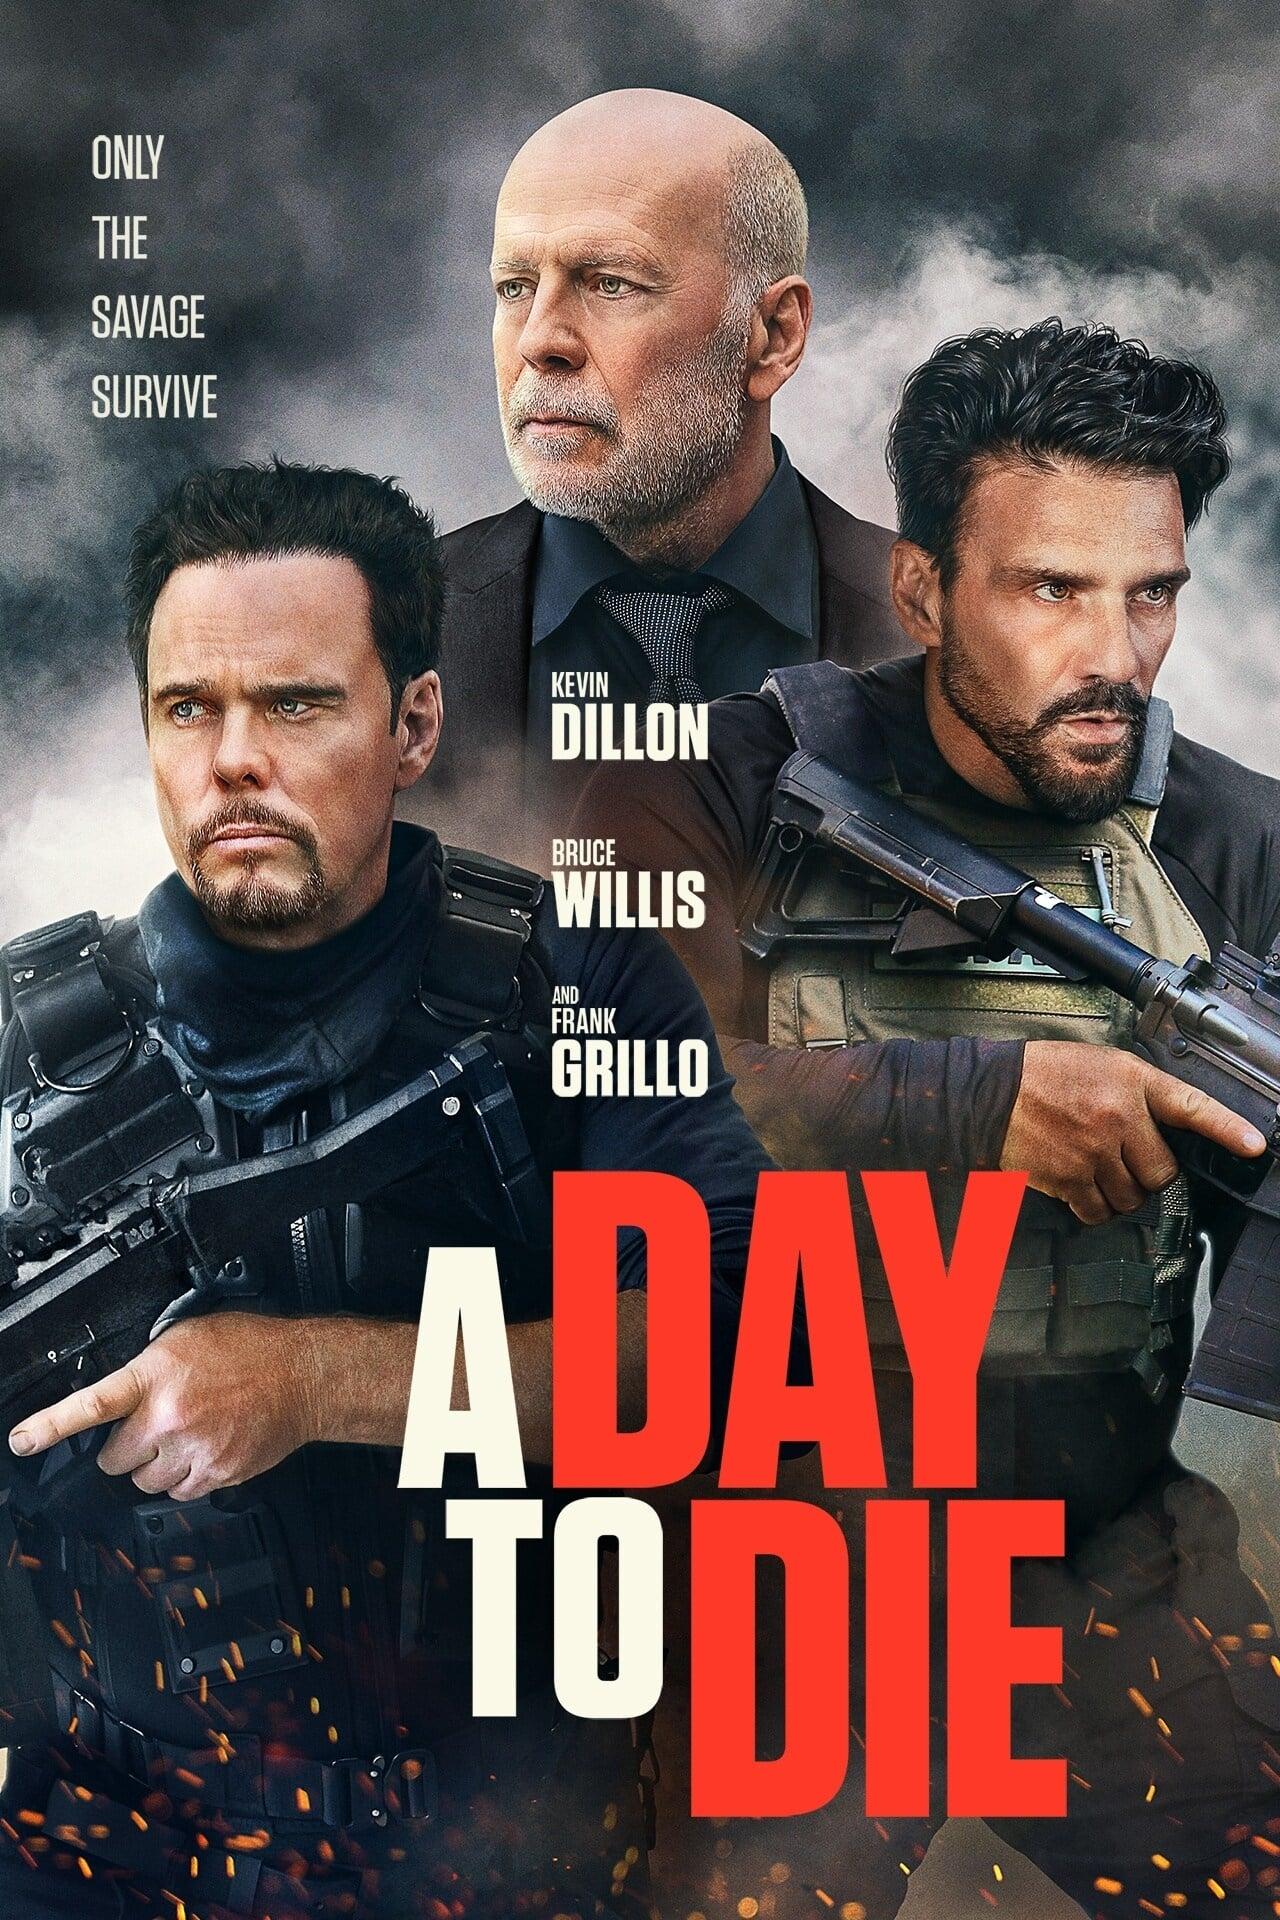 A Day to Die poster